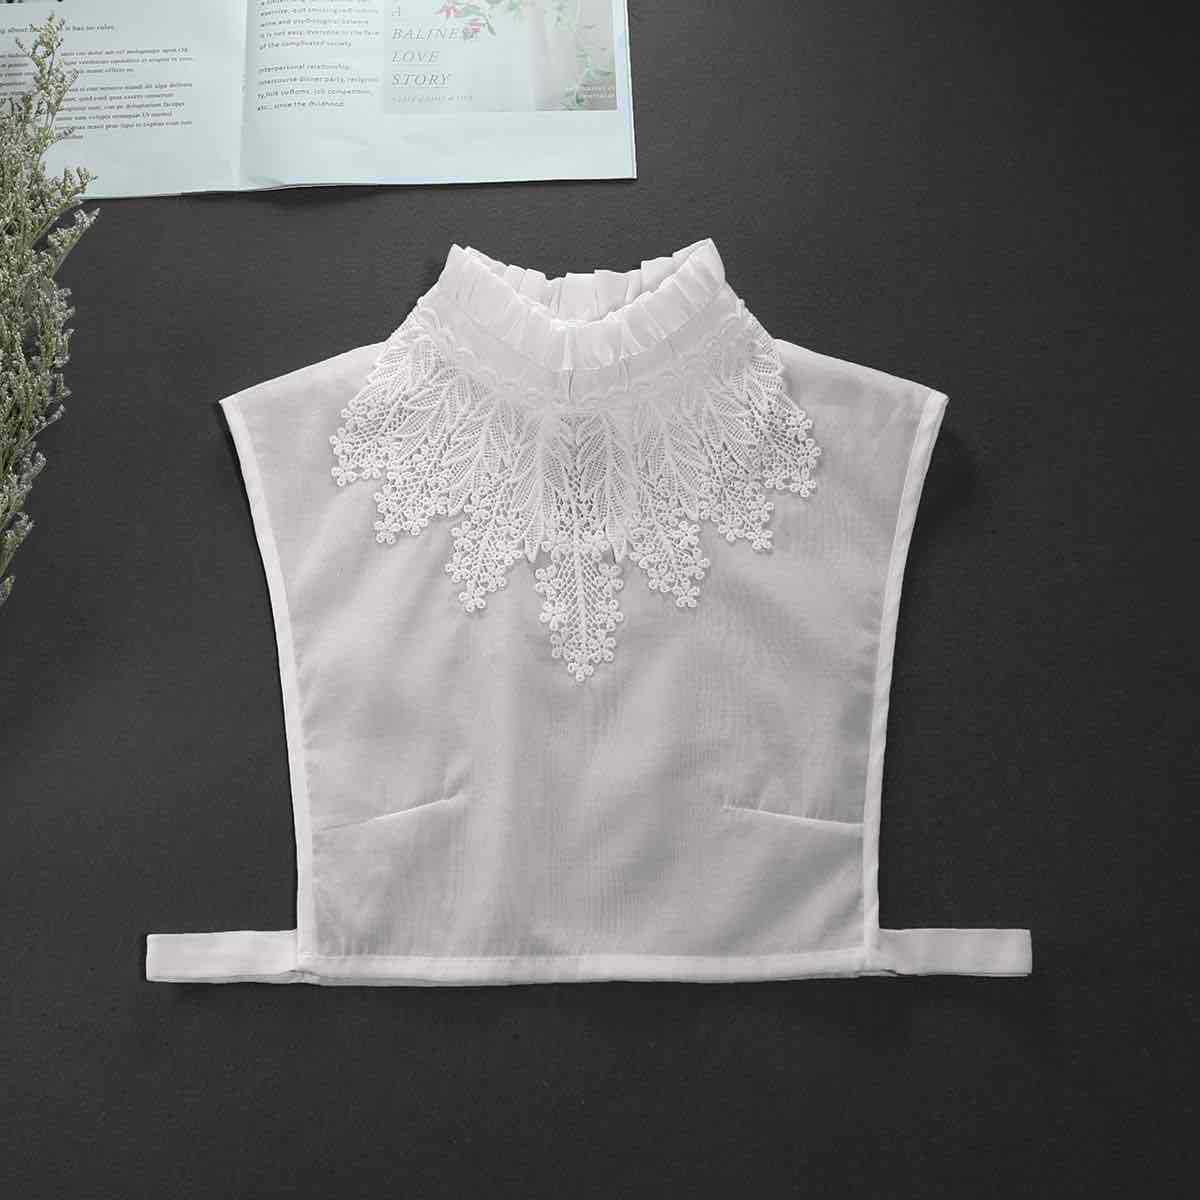 Linbaiway Women Embroidery Stand False Collars Adjustable Detachable Shirt Blouse Tops Ladies Solid White Fake Collars Decor